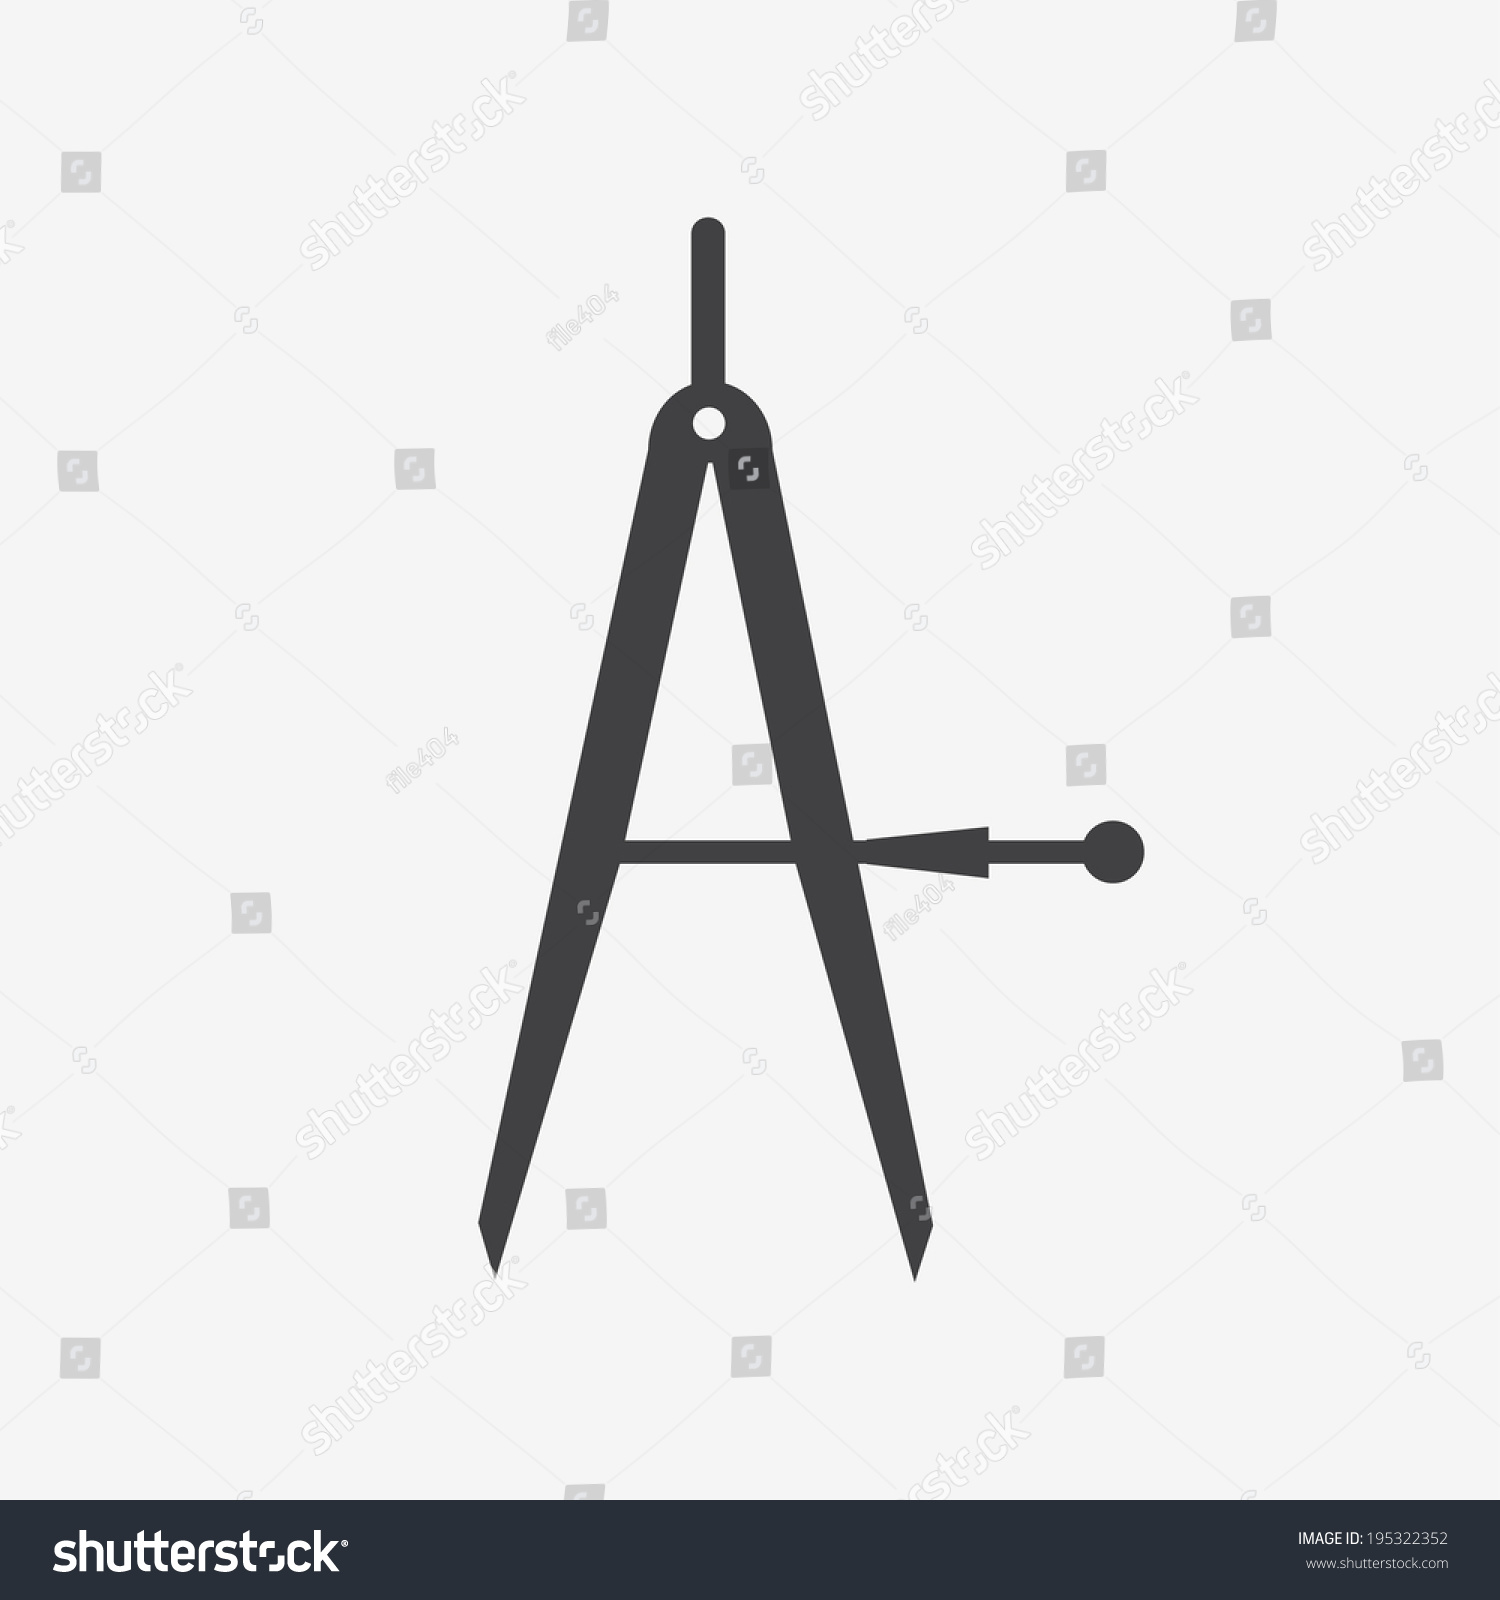 Drawing Compass Icon Stock Photo (Photo, Vector, Illustration ...